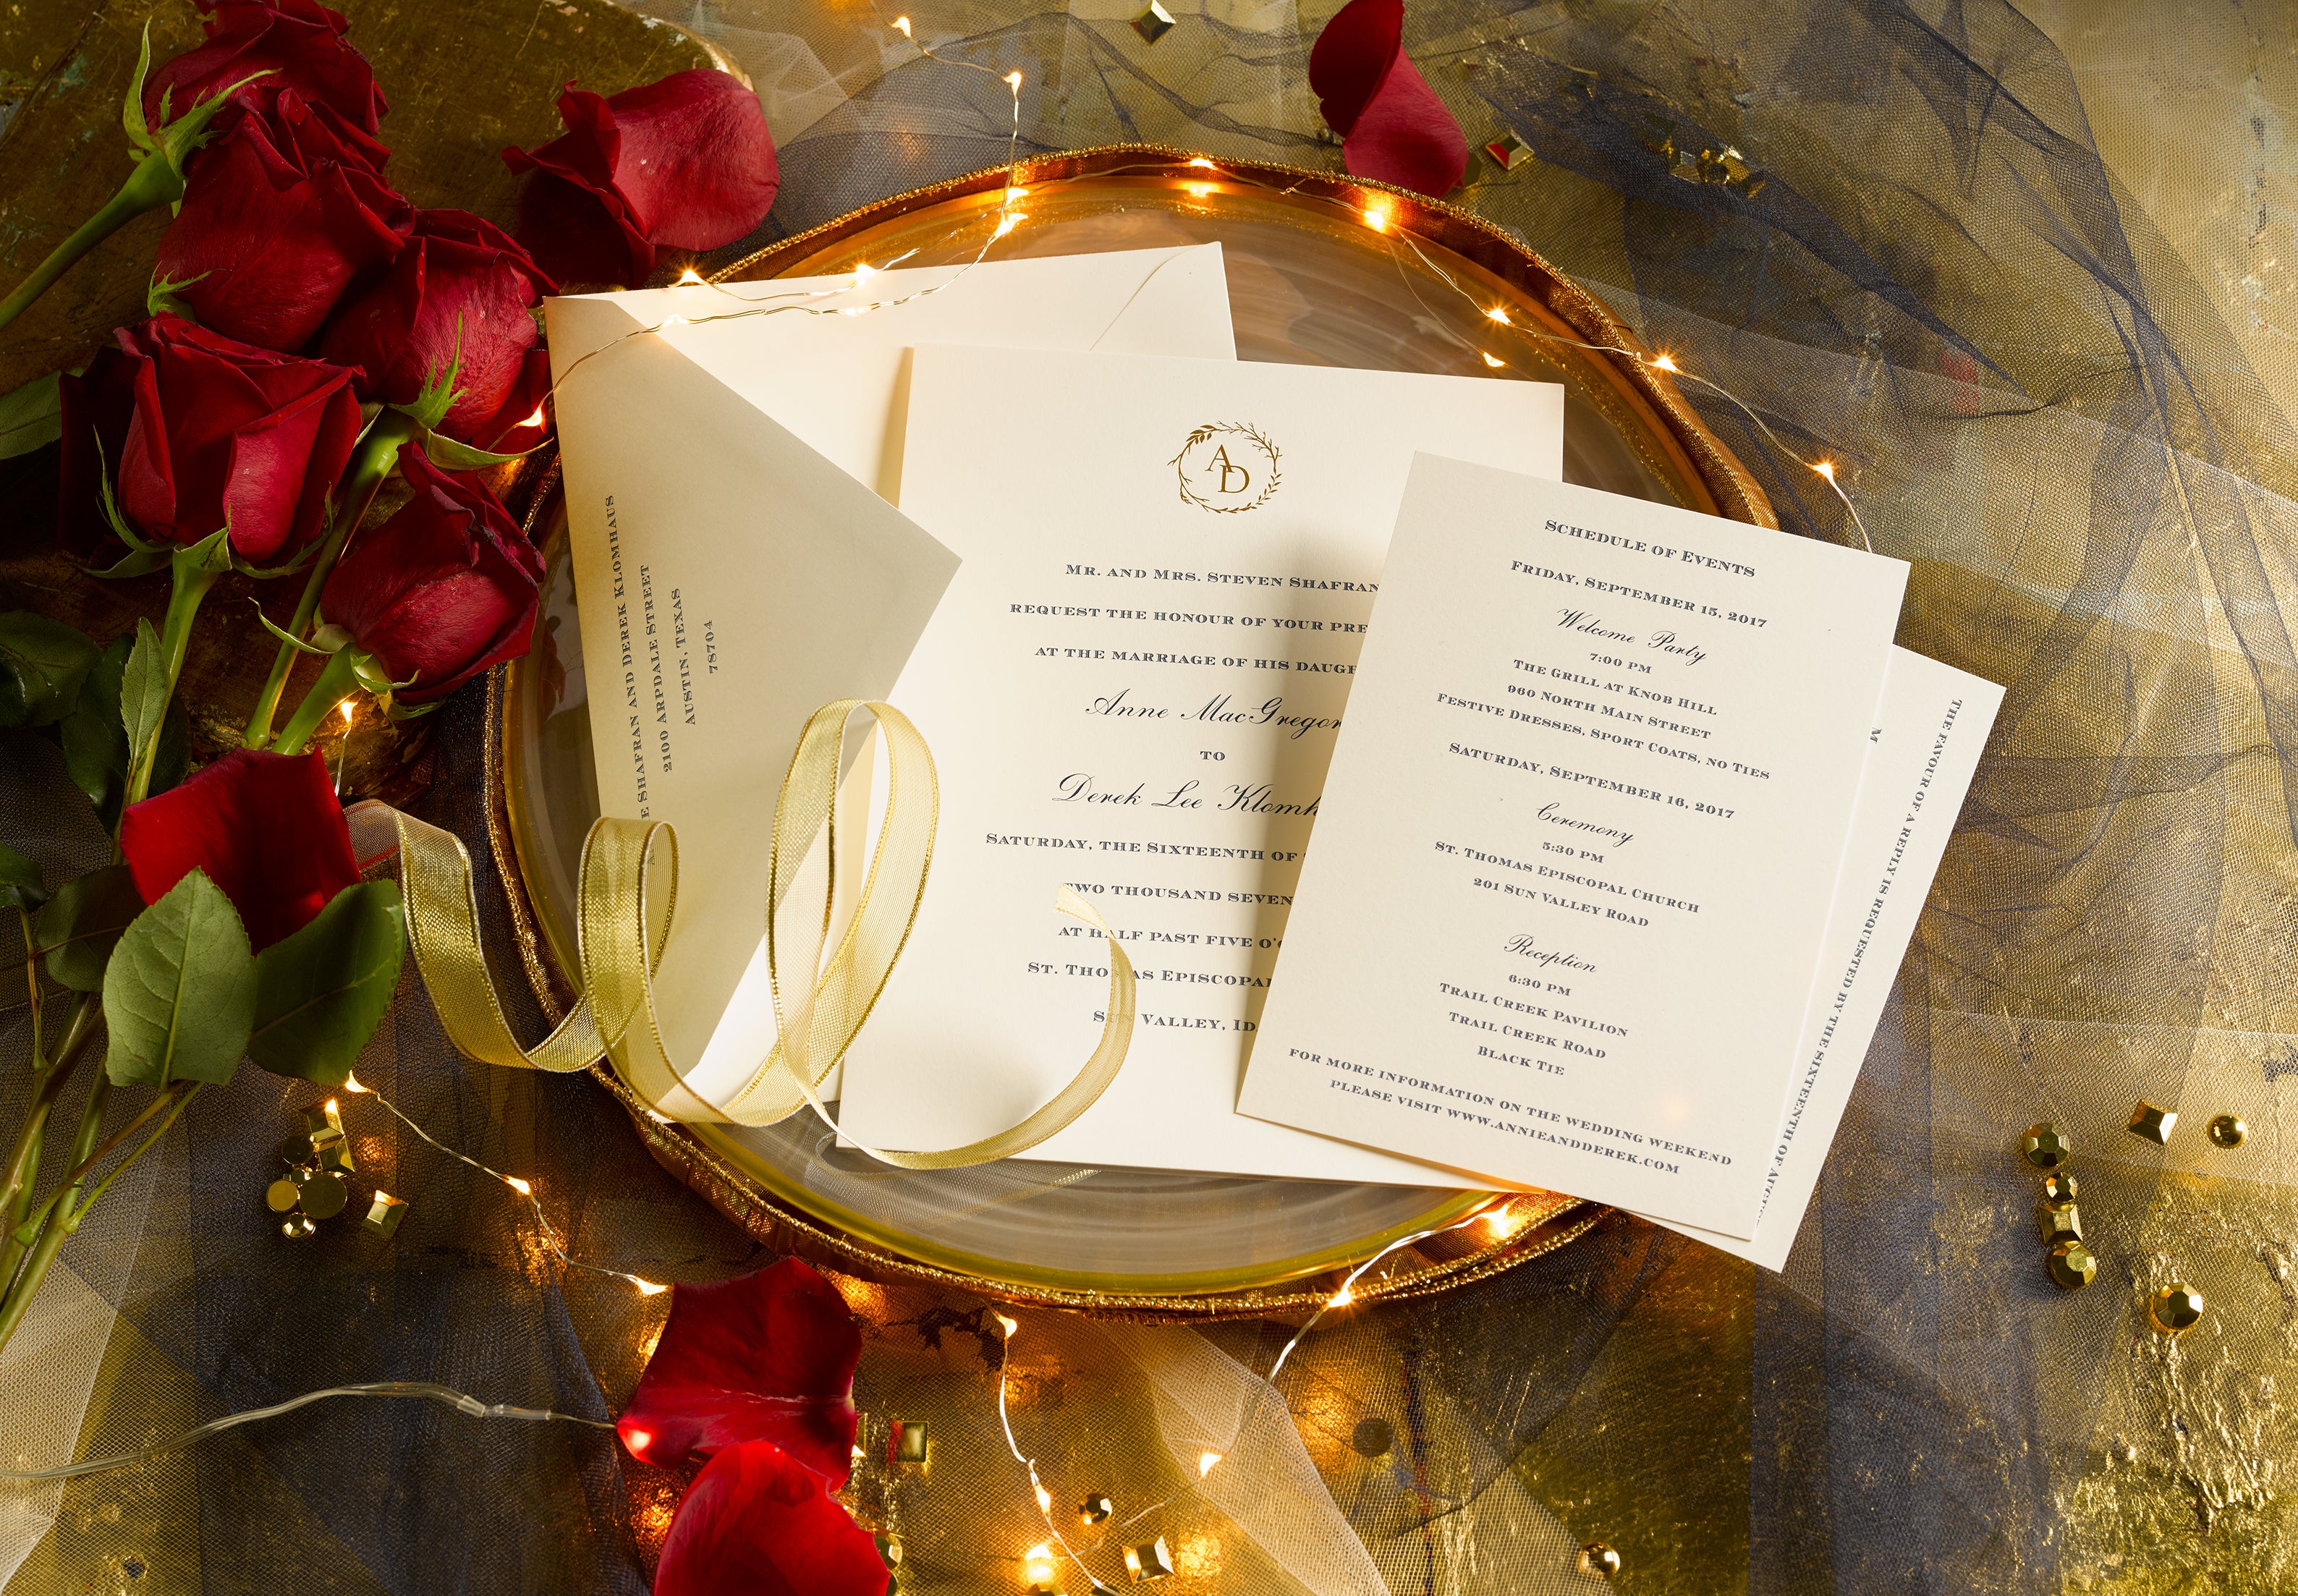 Anne & Derek is an engraved & foil stamped suite in navy and gold, set in Sun Valley Indiana. Call us toll-free at 1-800-995-1549 or email us at hello@pickettspress.com